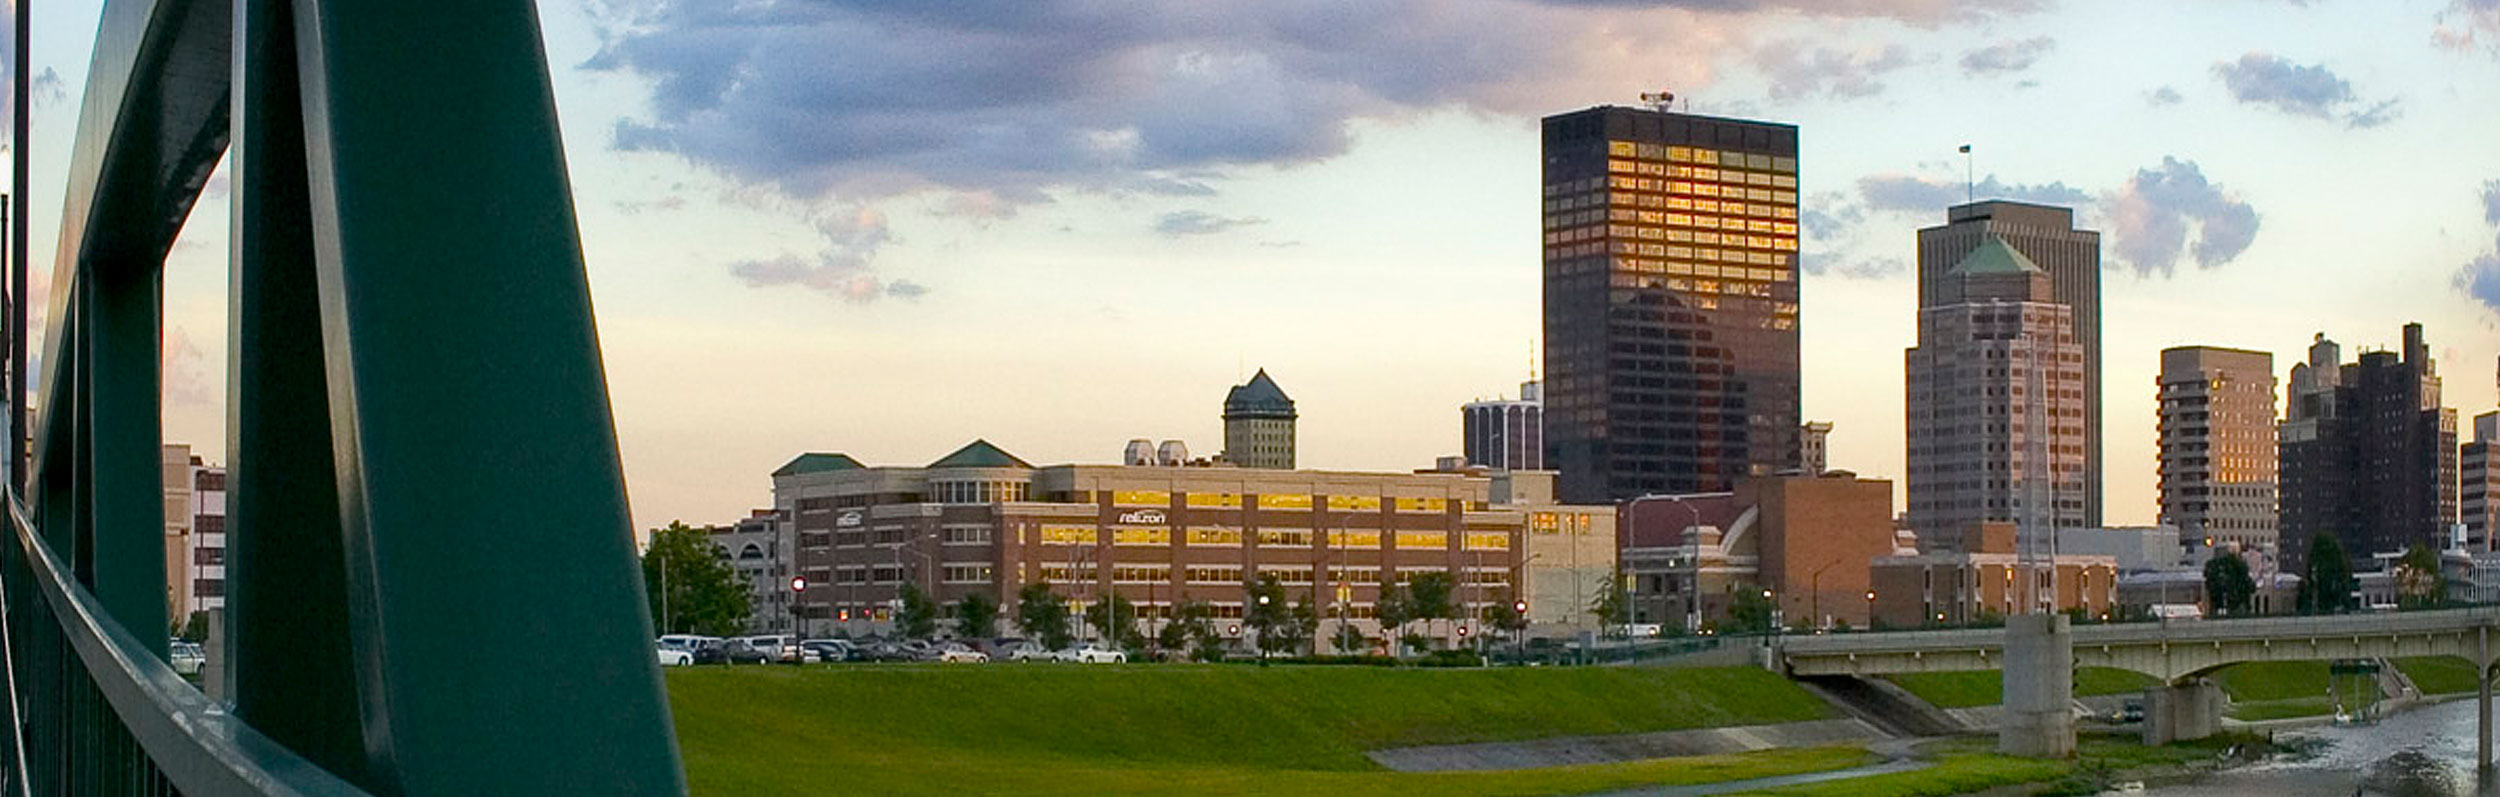 Dayton, OH Ranks 9th Nationally in Employment Outlook for 2020 Photo